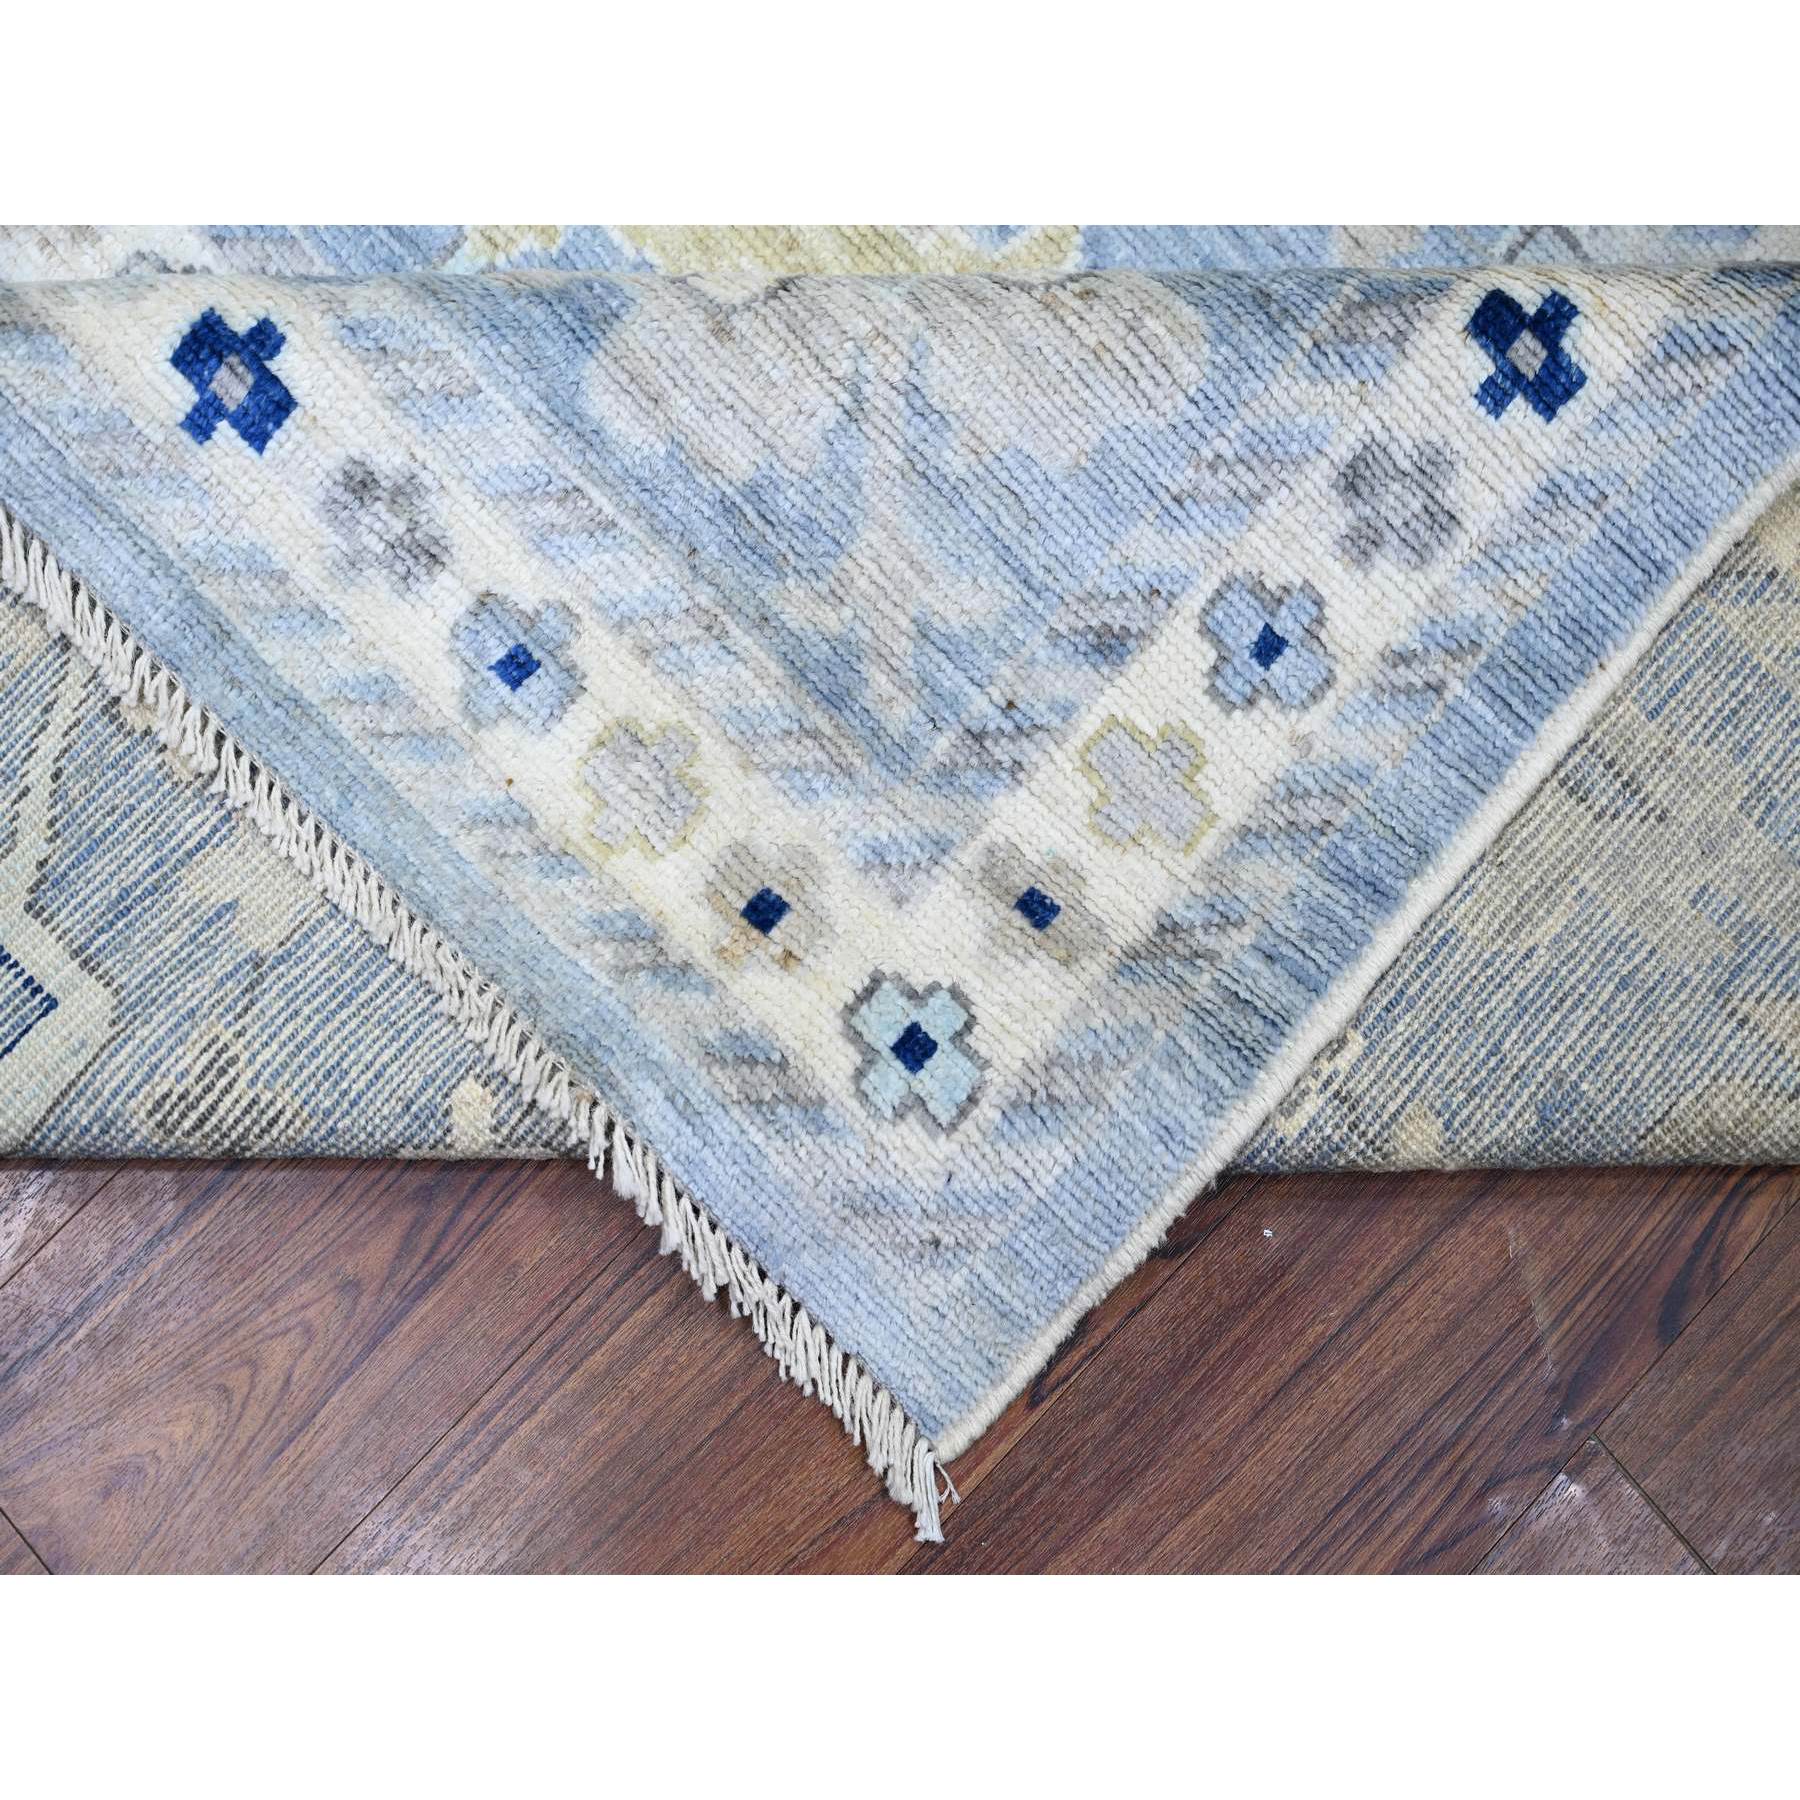 12'x12' Air Force Blue, Pure Wool Hand Woven, Natural Dyes Afghan Angora Oushak with All Over Motifs, Oriental Rug 